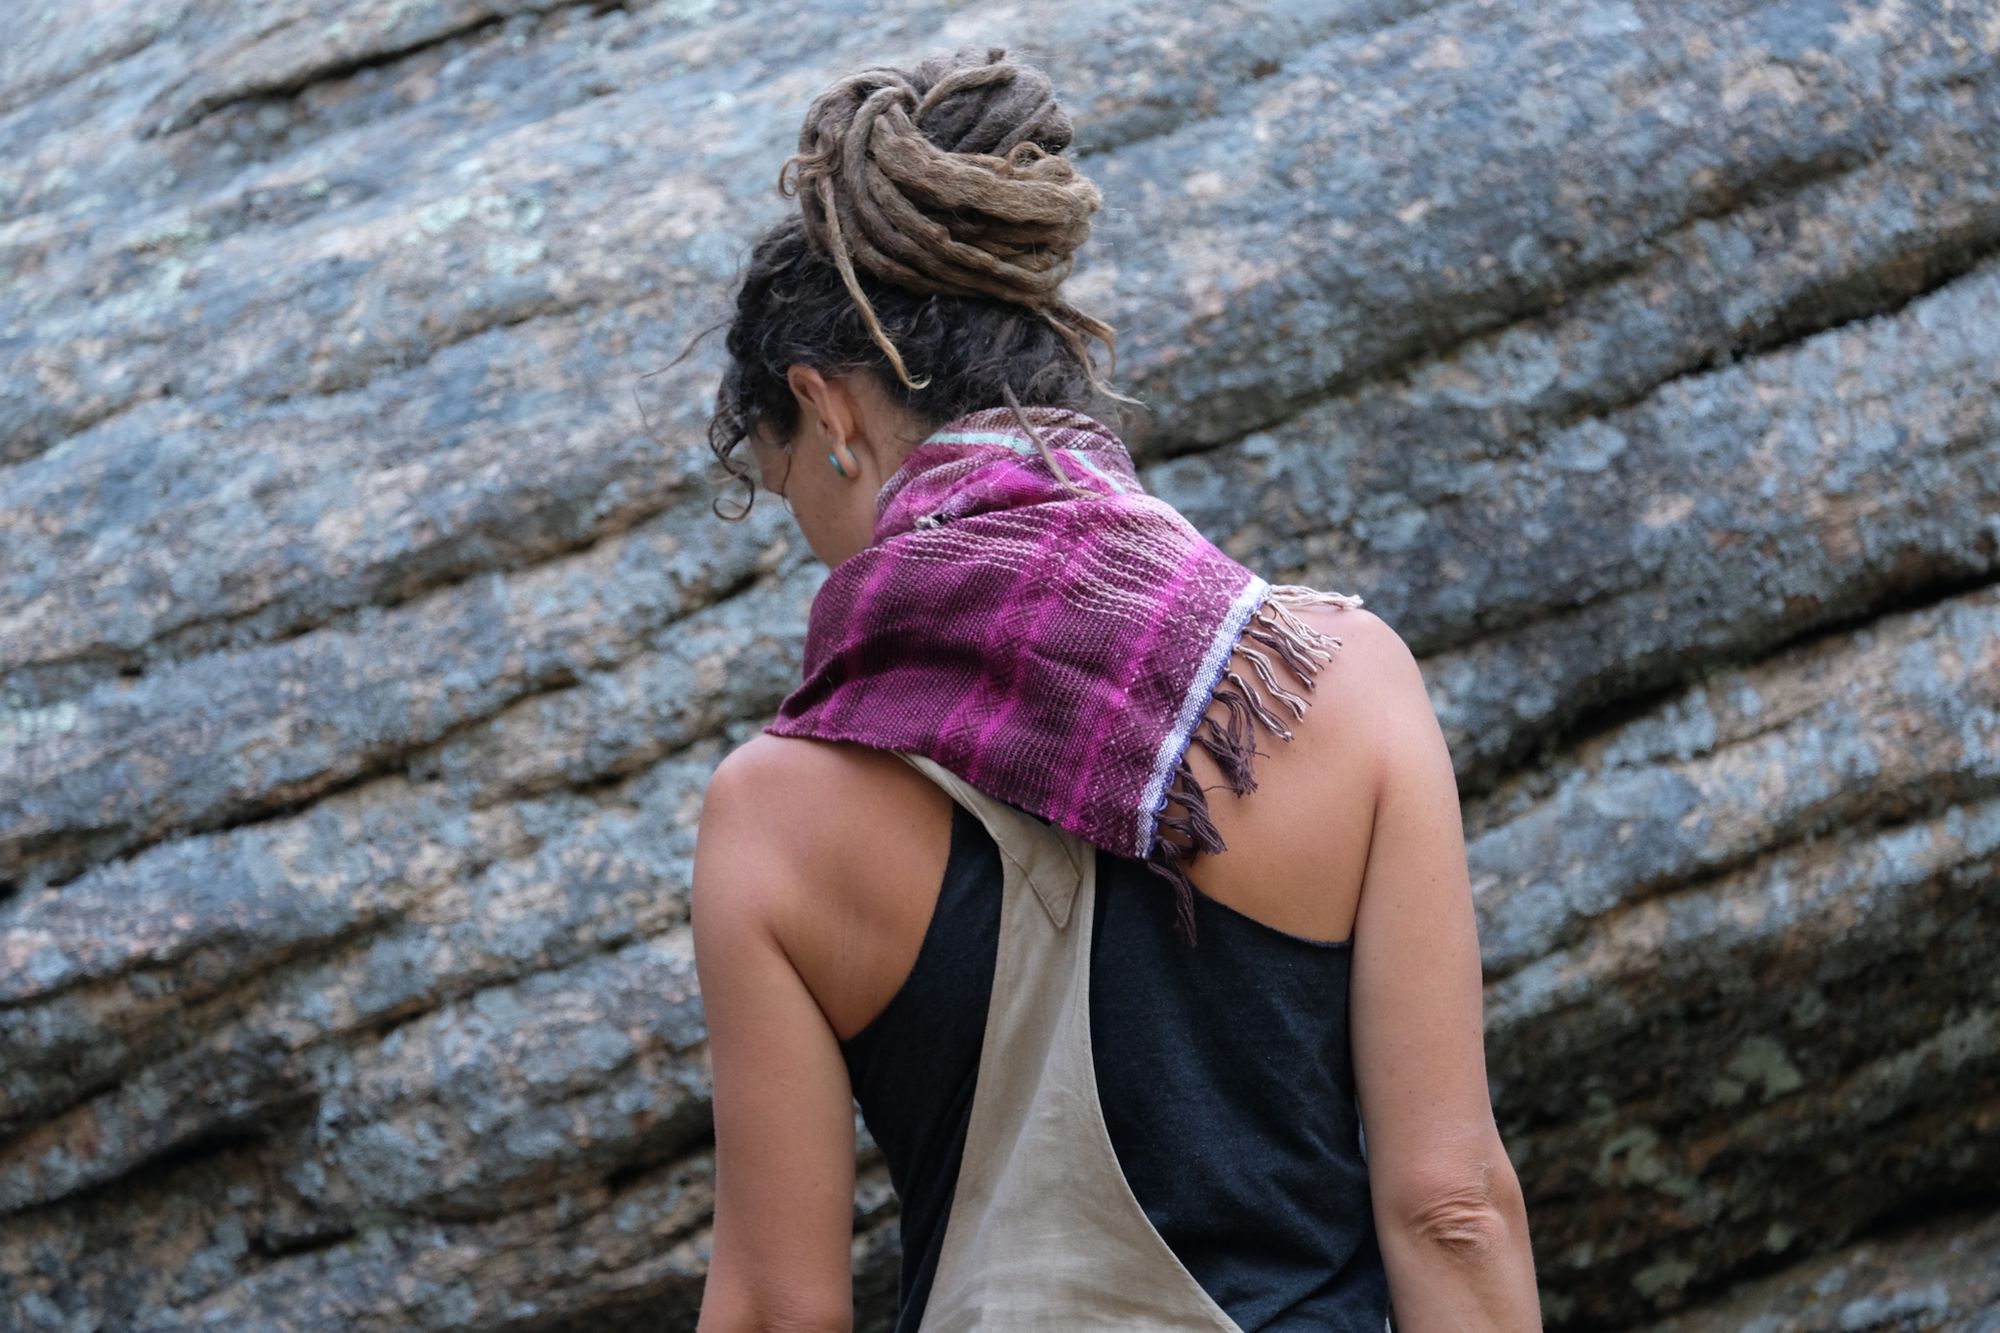 Woman wearing brown overalls and handwoven raspberry pink, brown and white scarf standing in front of a boulder